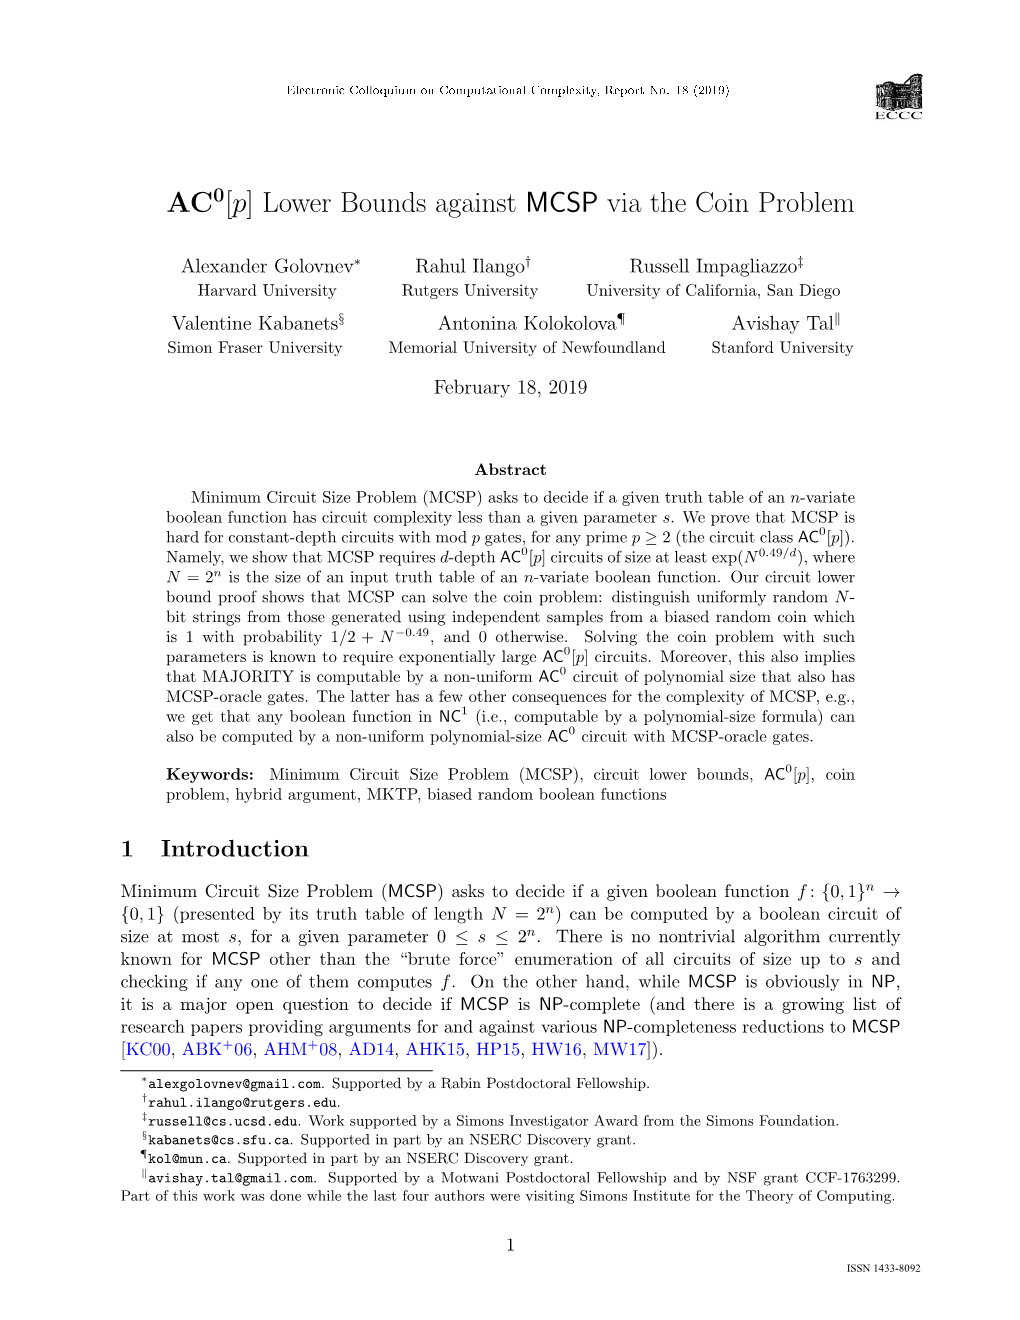 AC0[P] Lower Bounds Against MCSP Via the Coin Problem